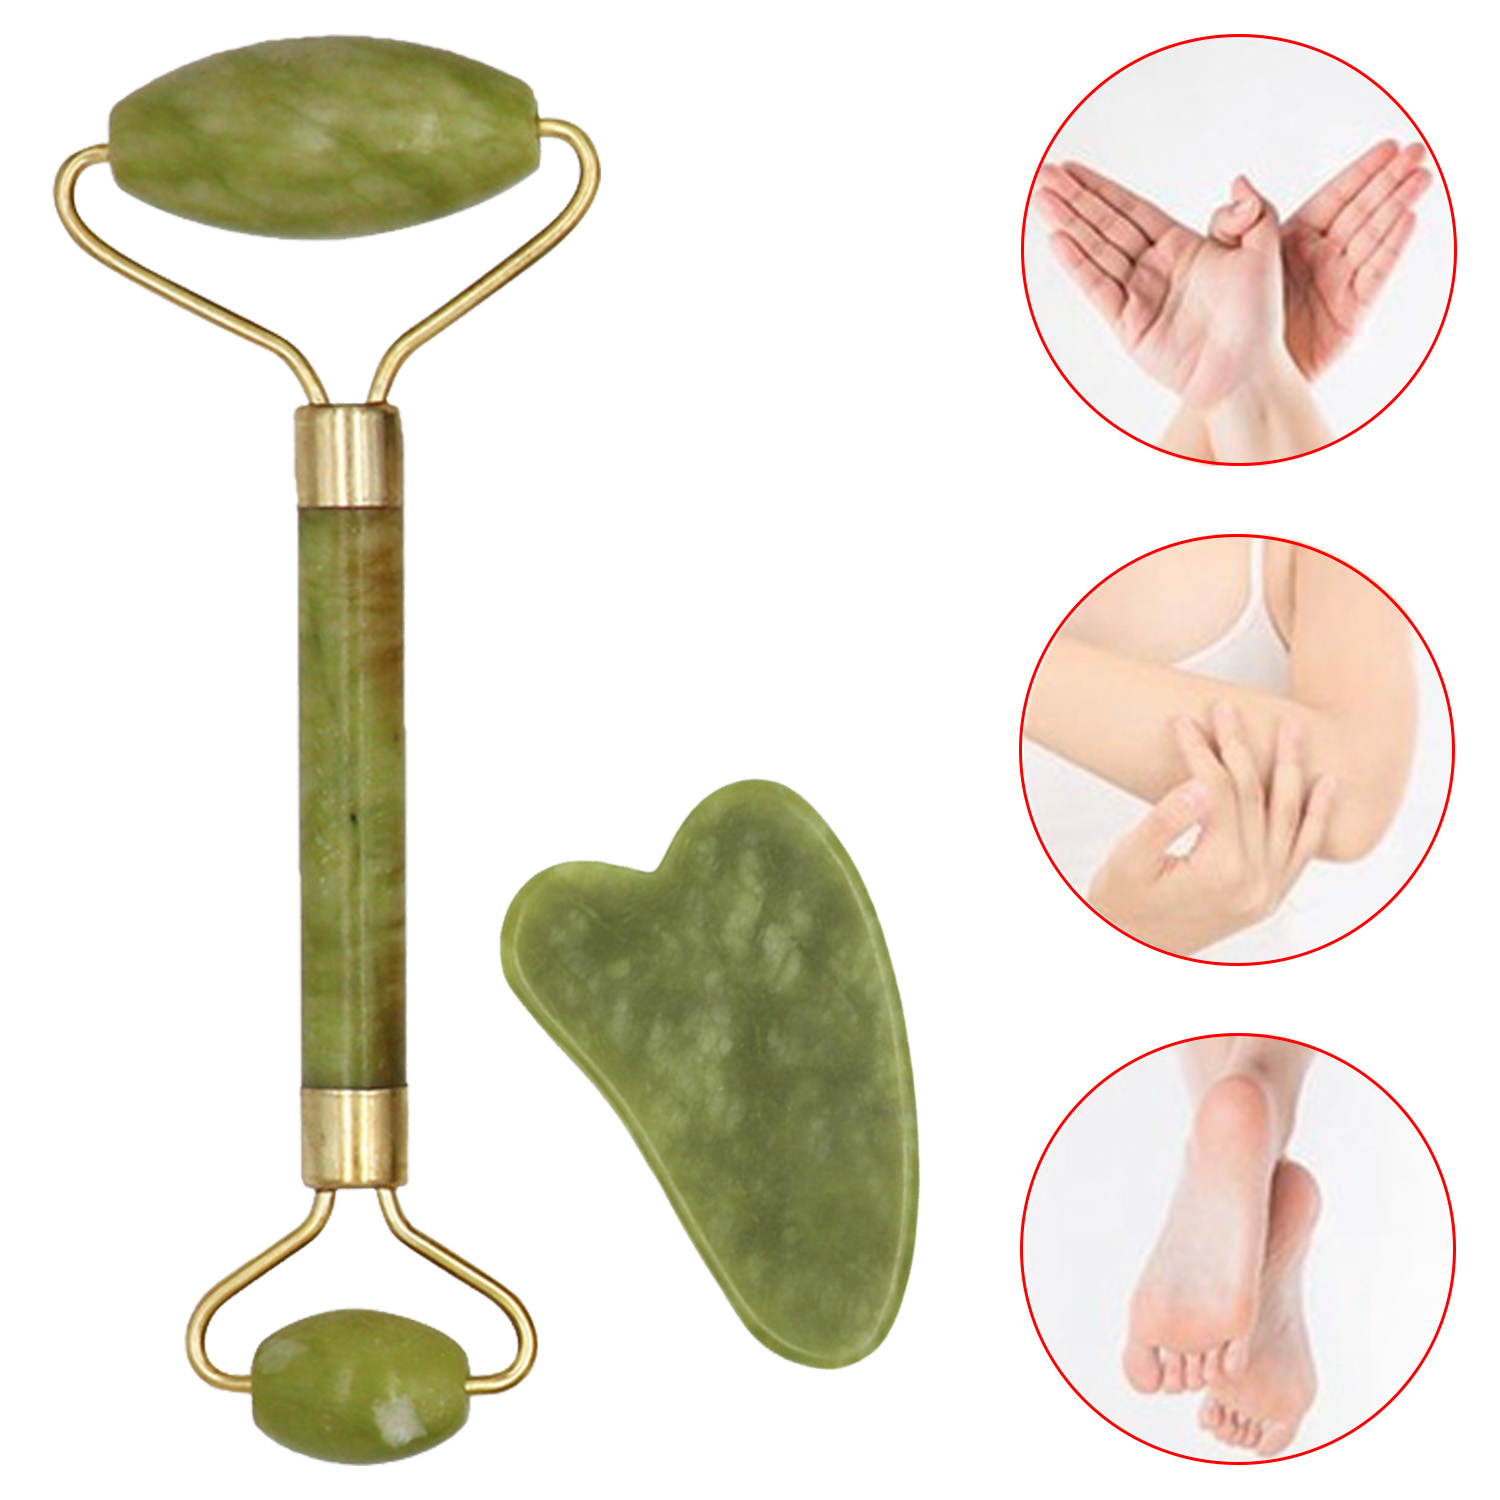 Jade Face Portable Double Headed Stone Face Slimming Lift Massage Double Head Facial Roller Massager